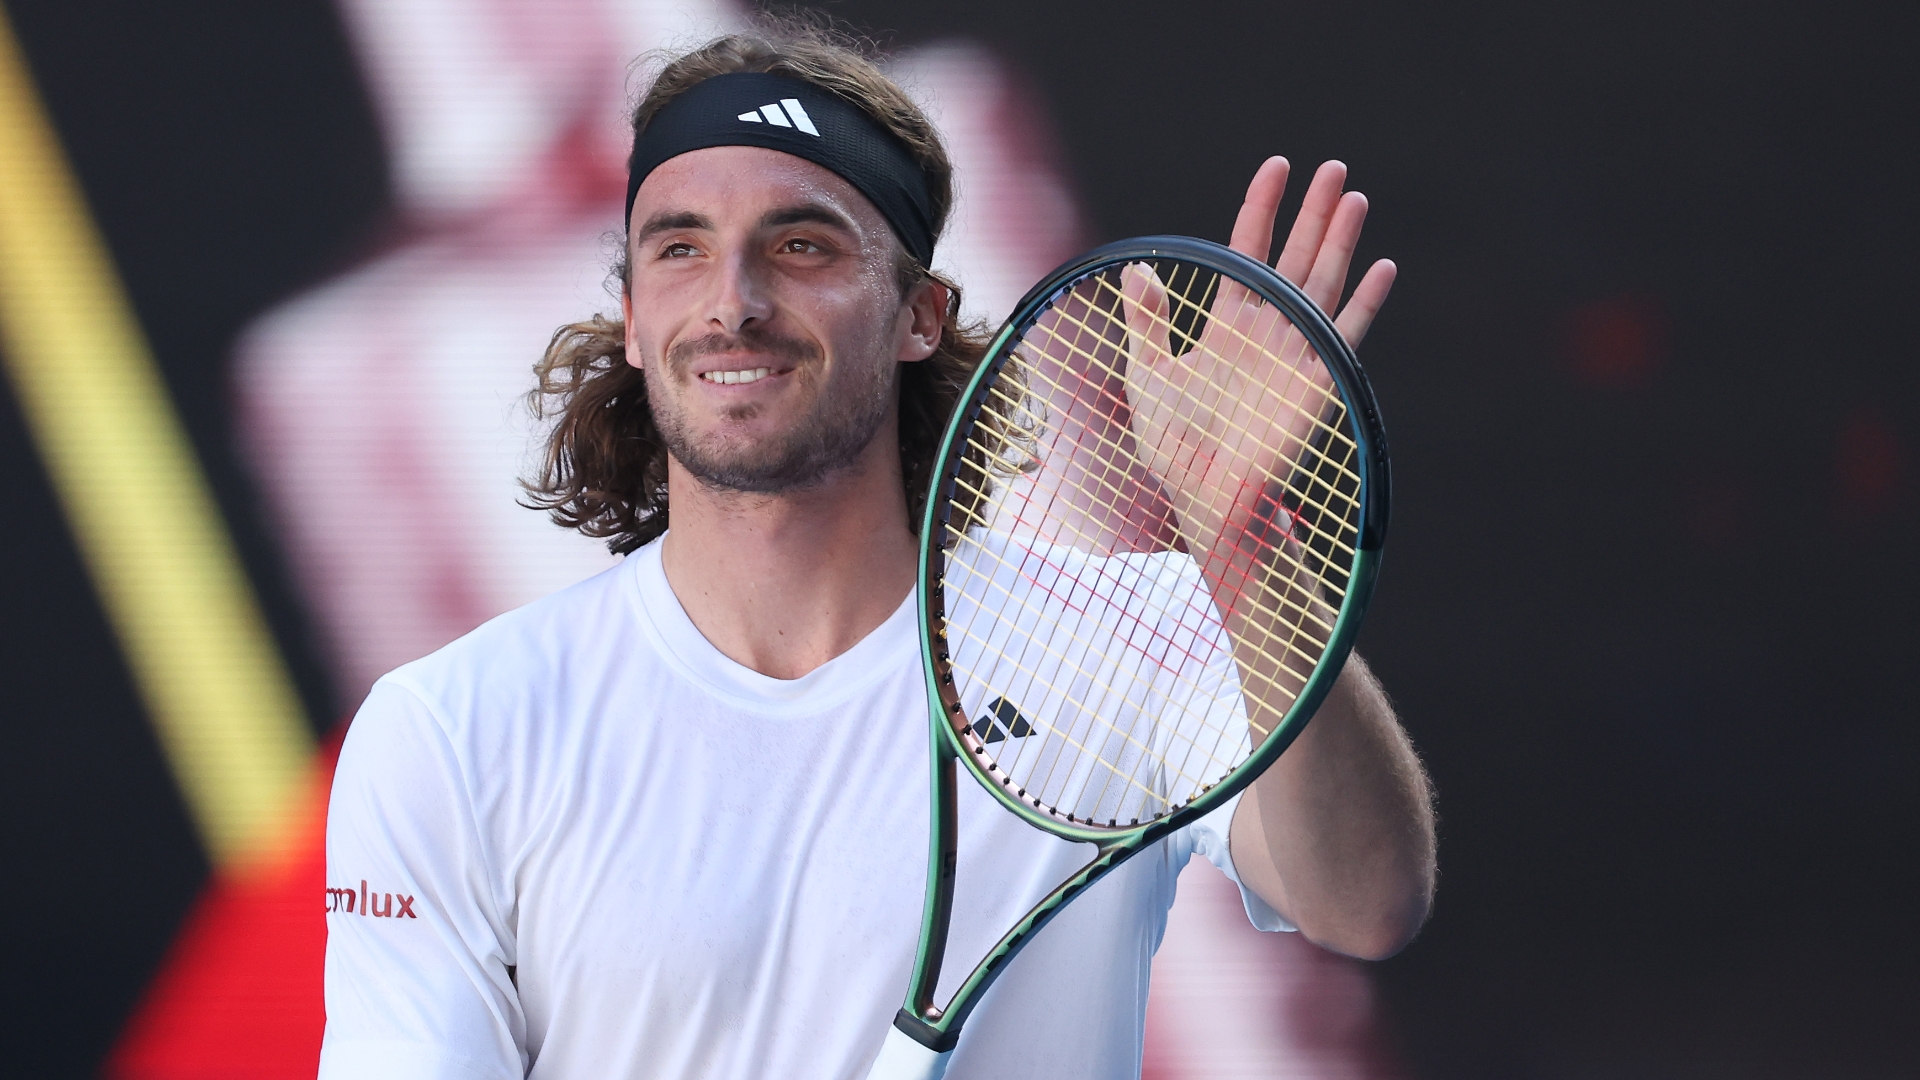 Tsitsipas advances to Aussie Open final with win over Khachanov - Stream the Video